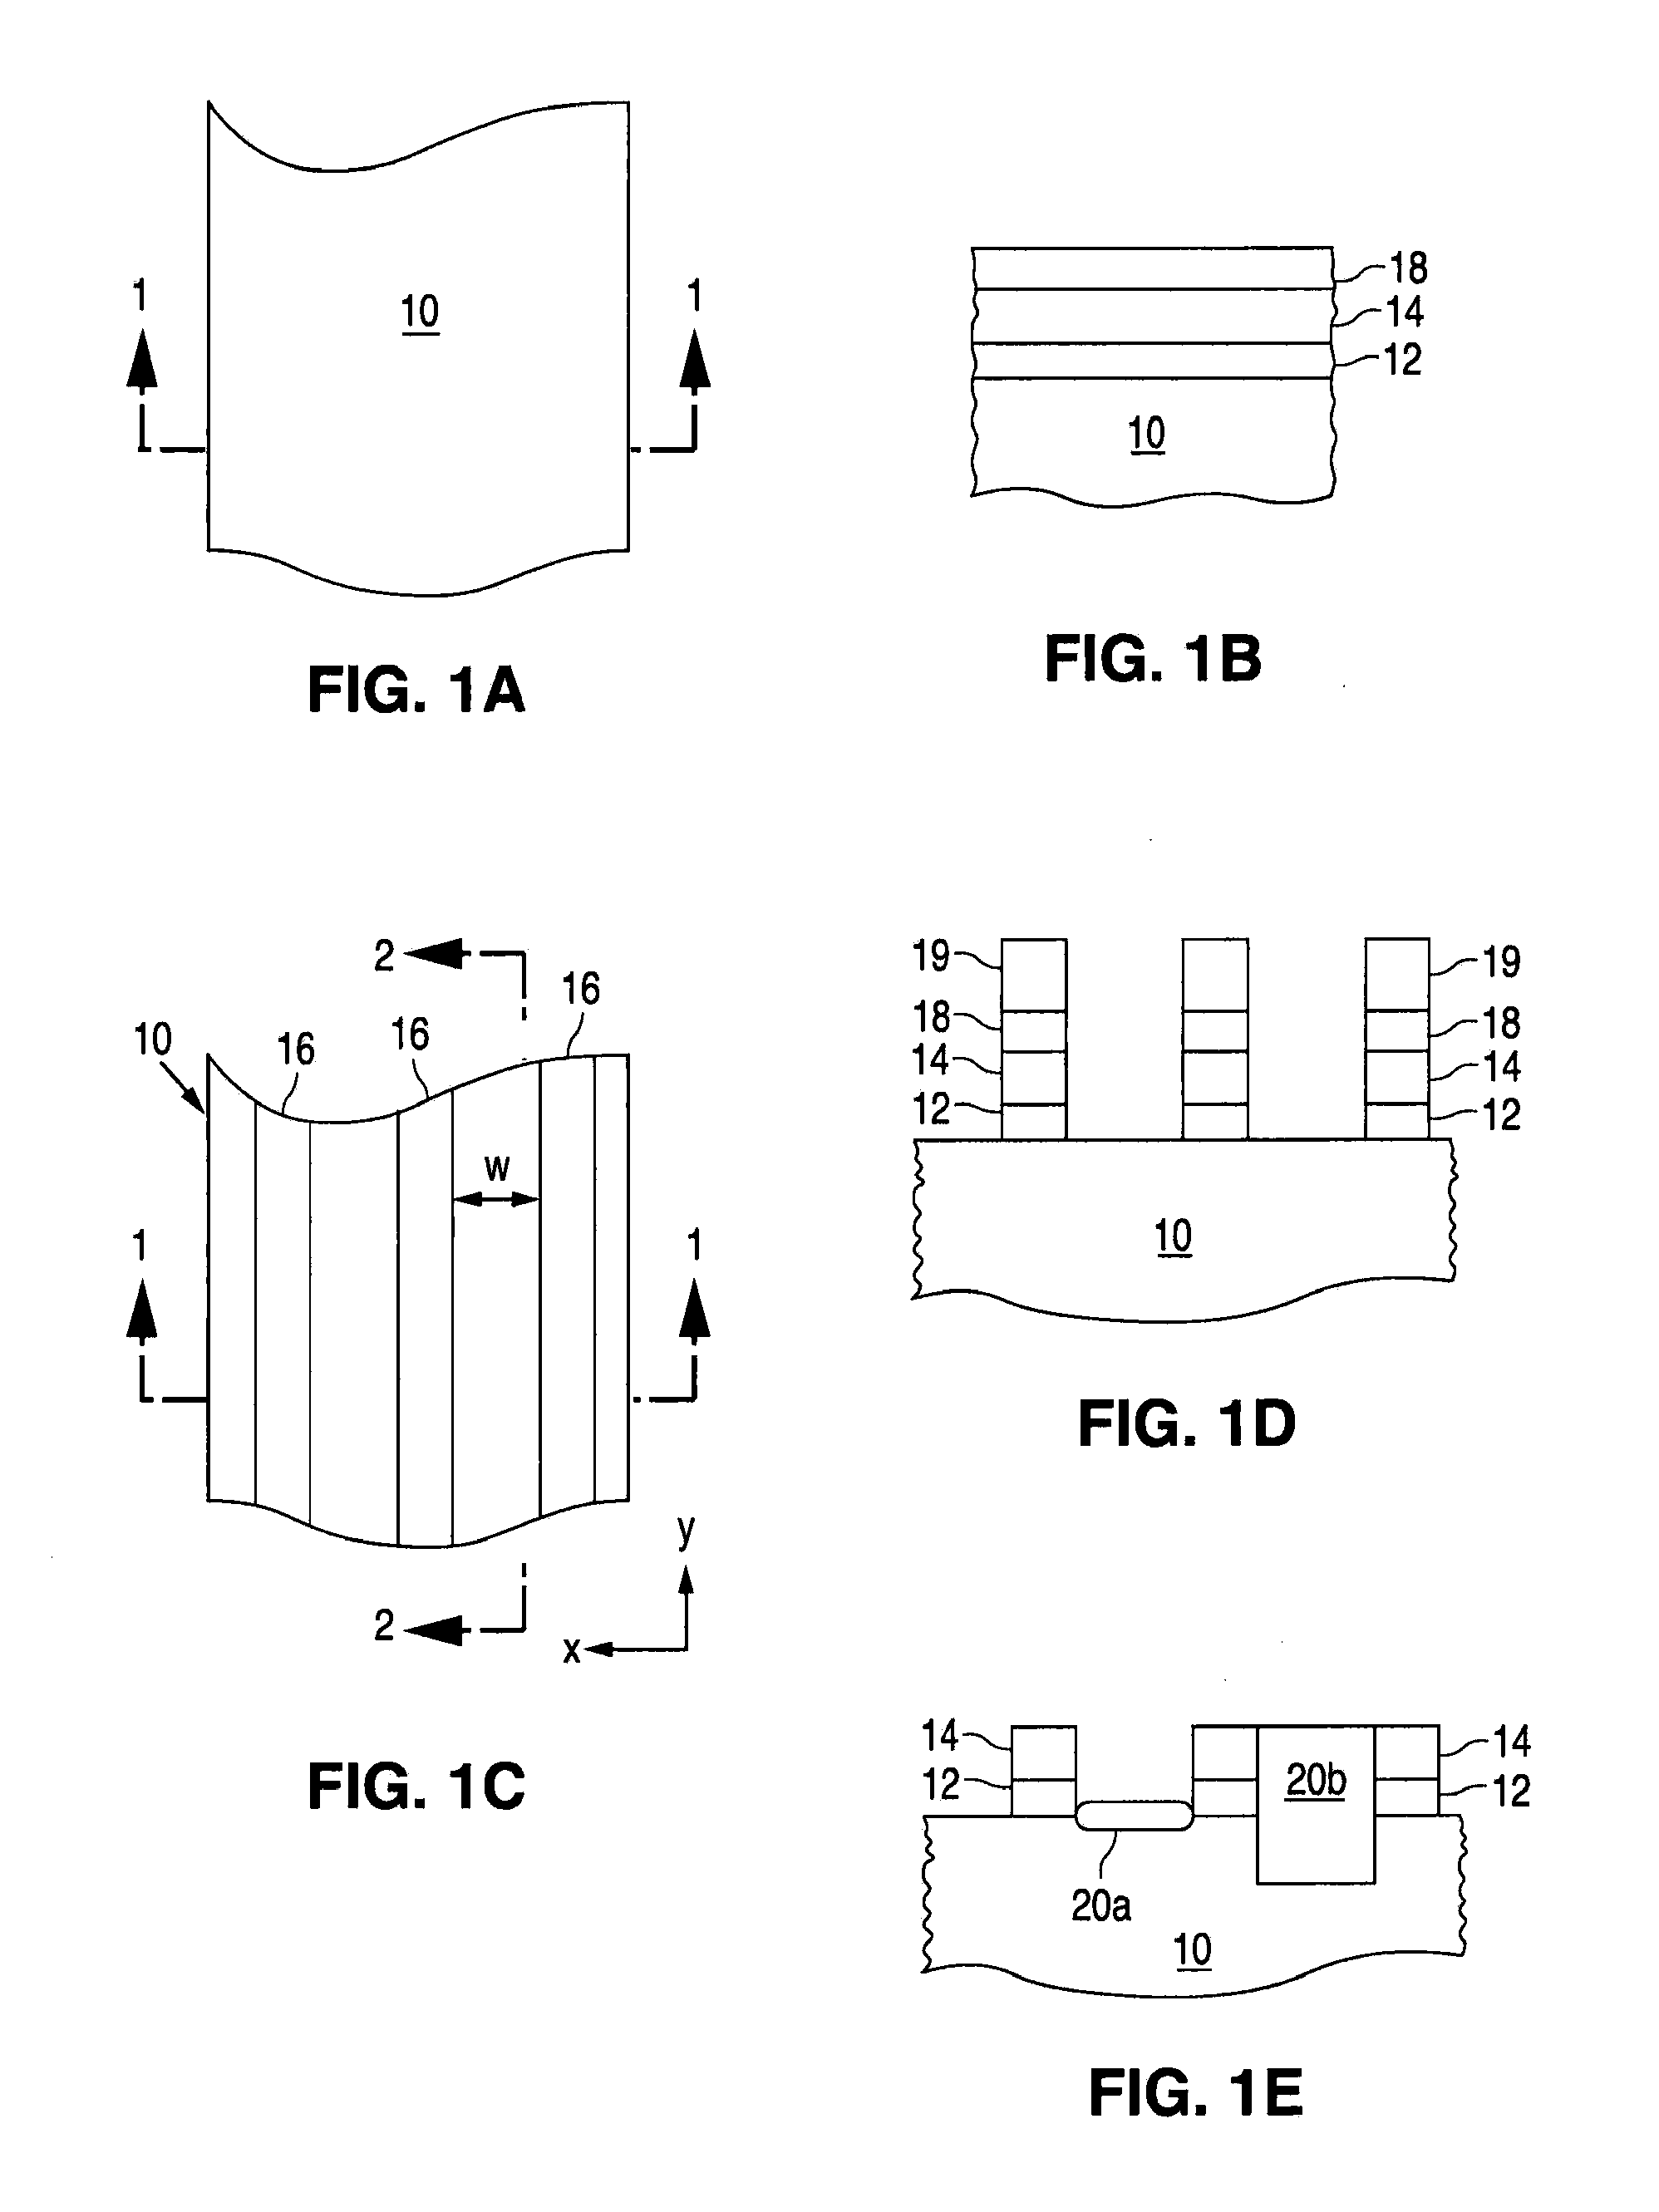 Semiconductor memory array of floating gate memory cells with program/erase and select gates